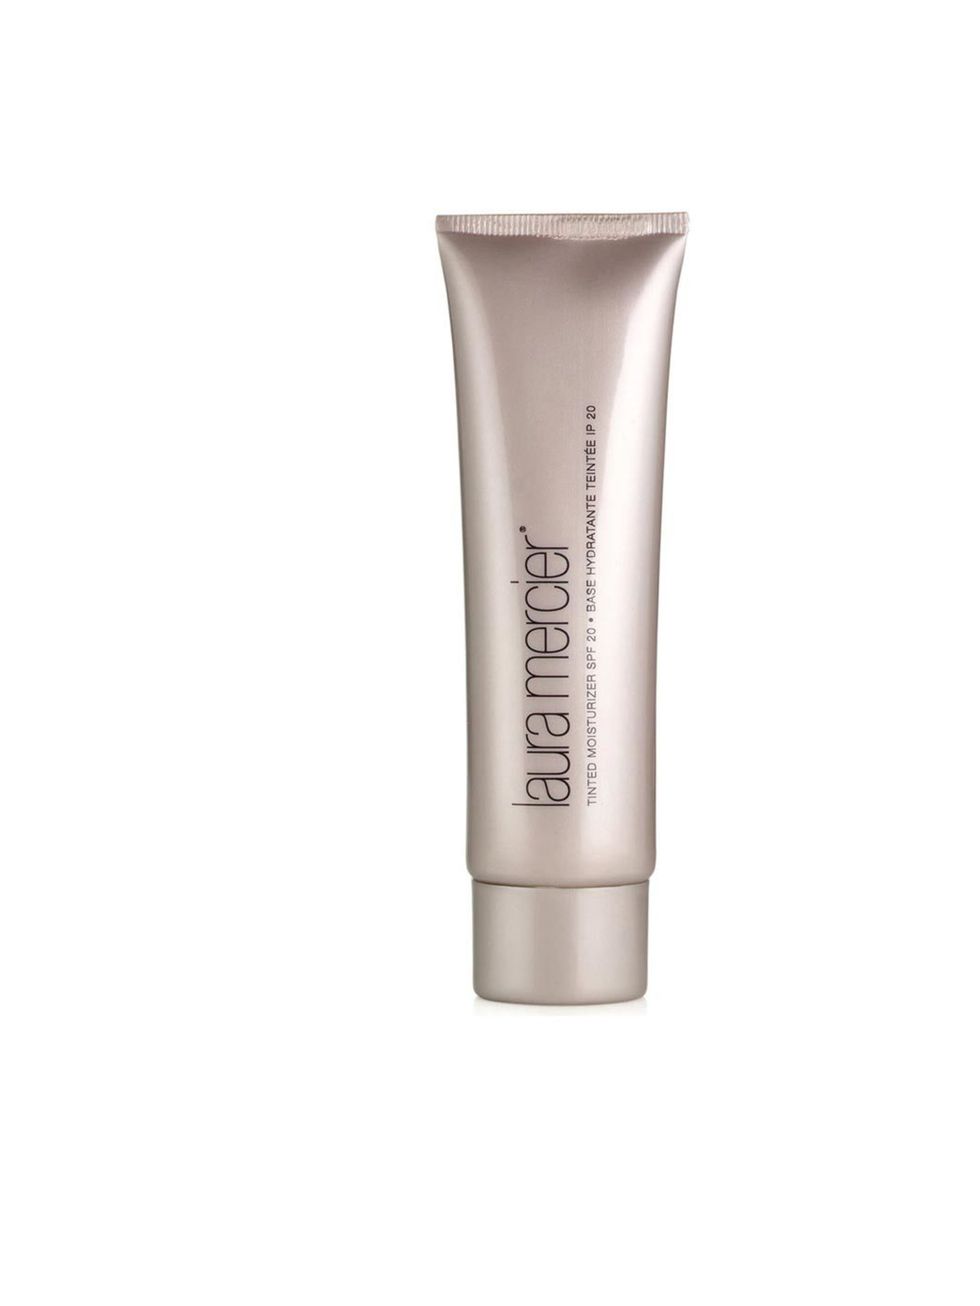 <p>Laura Mercier Tinted Moisturiser, £33, at <a href="http://www.liberty.co.uk/fcp/product/Liberty/Make-Up/Tinted-Moisturiser-Bisque-SPF20-Laura-Mercier/45976">Liberty</a></p>